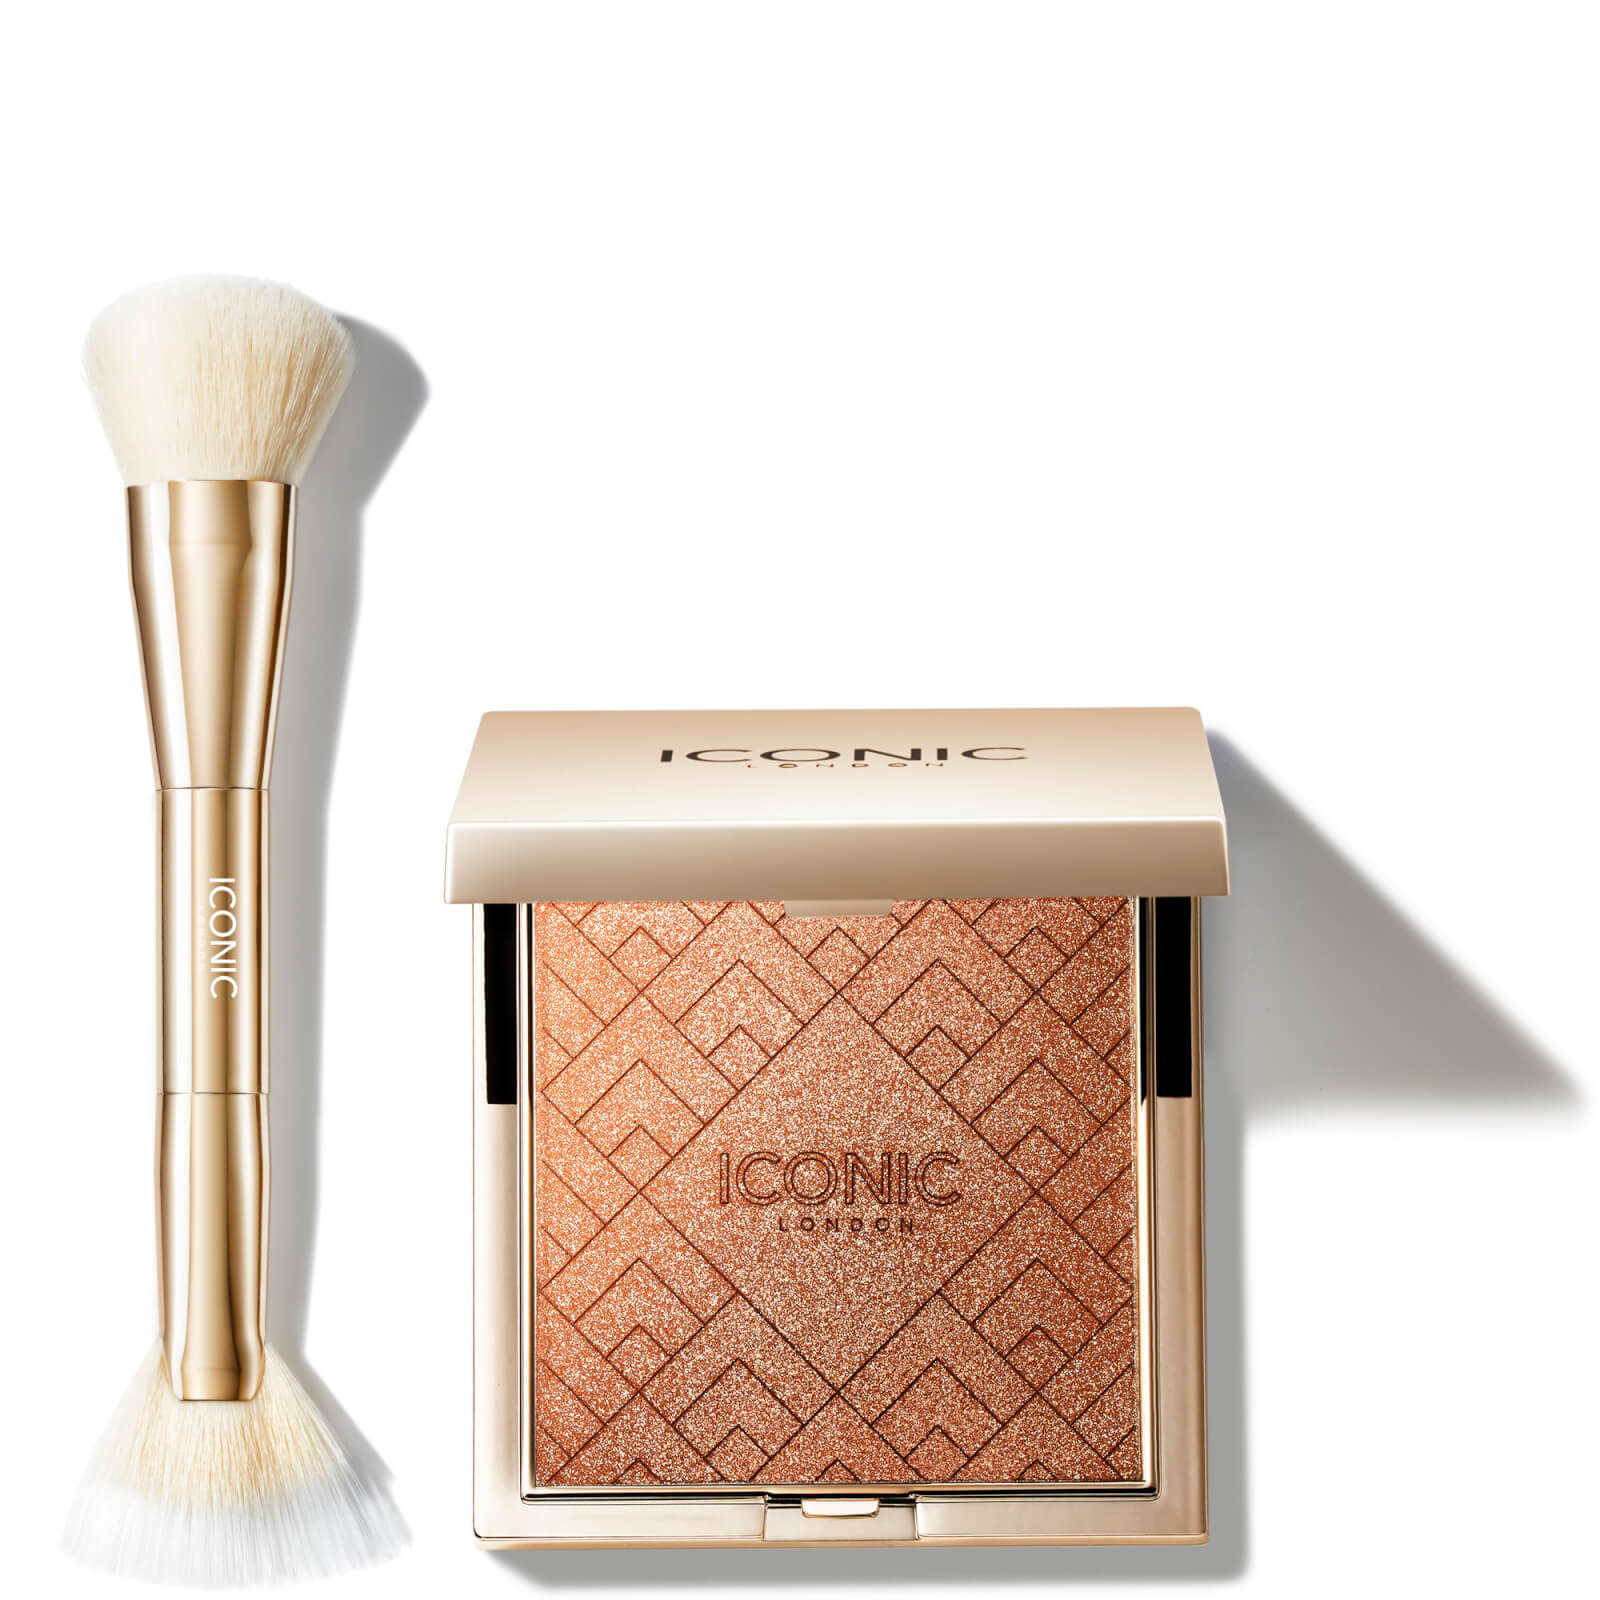 Iconic London Kissed By The Sun Multi-use Cheek Glow And Brush (various Shades) - Date Night